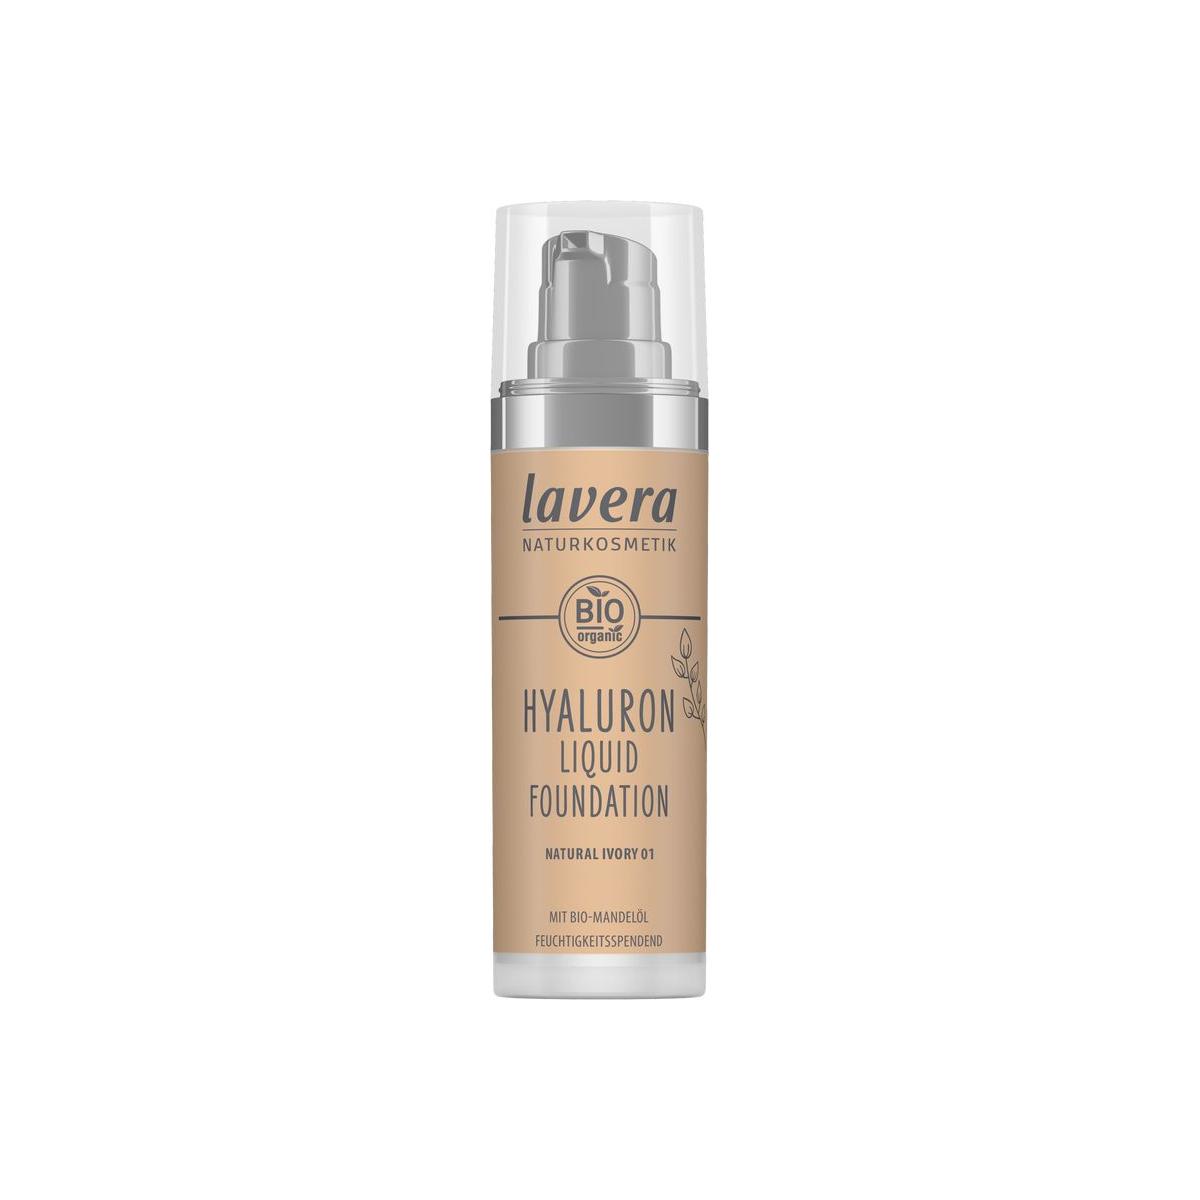 Hyaluron liquid foundation natural ivory 01